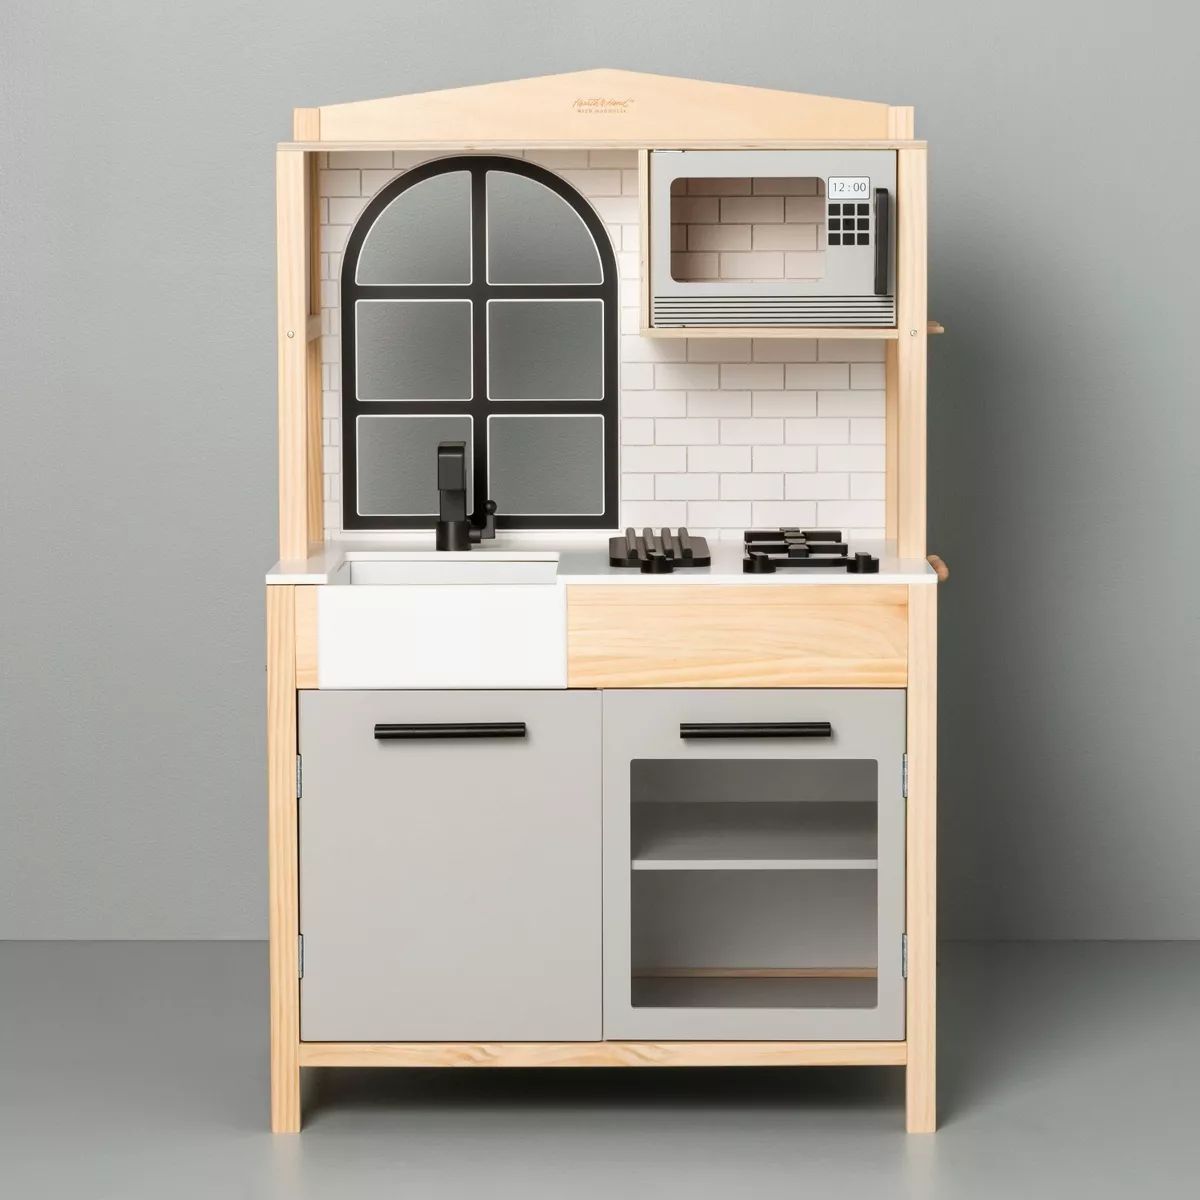 Toy Kitchen - Hearth & Hand™ with Magnolia | Target